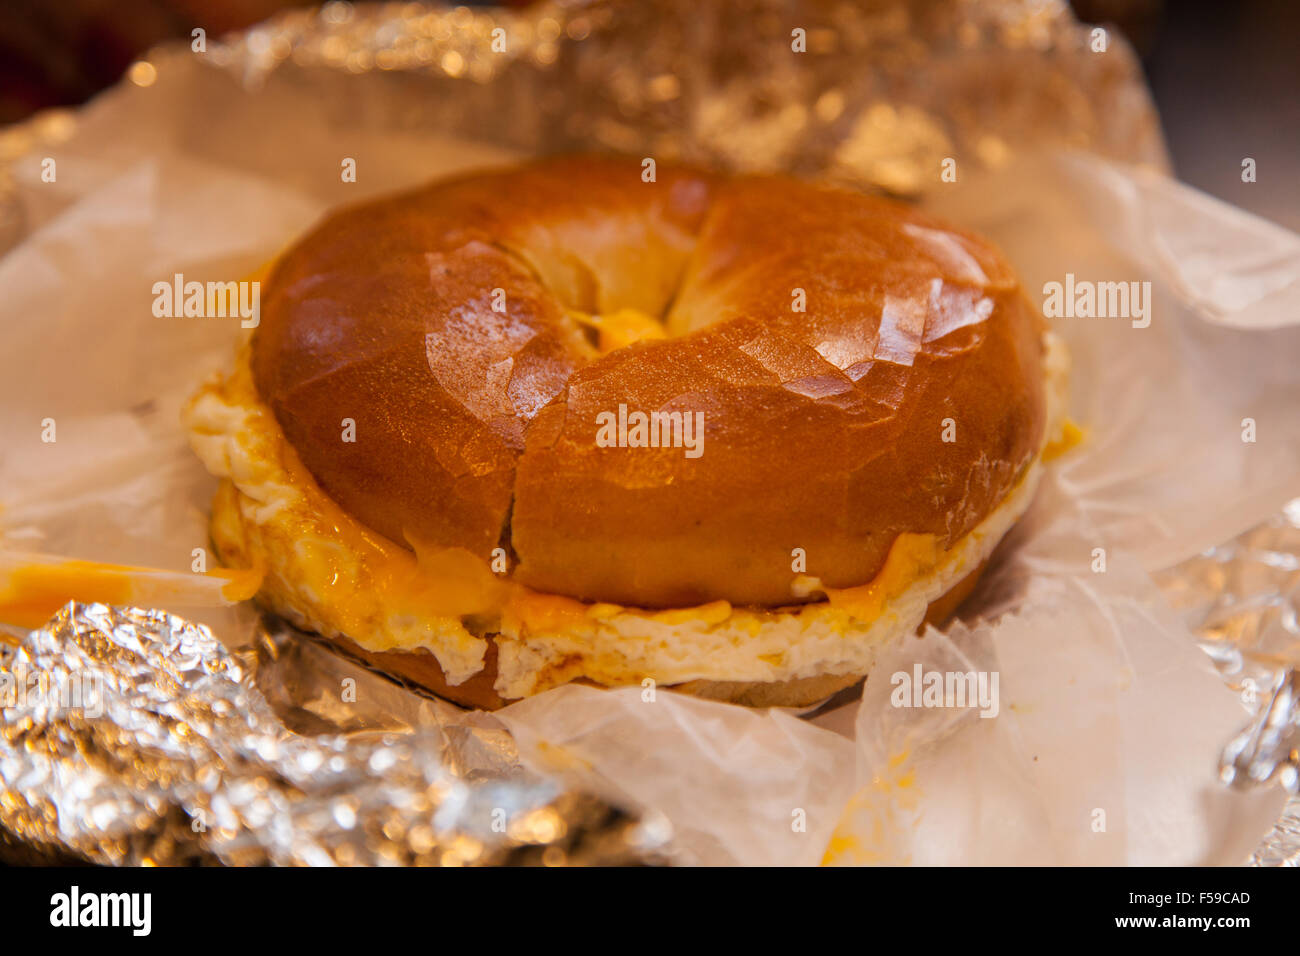 Egg and cheese toasted bagel Dali market delicatessen, 7th Avenue, New York City, United States of America. Stock Photo